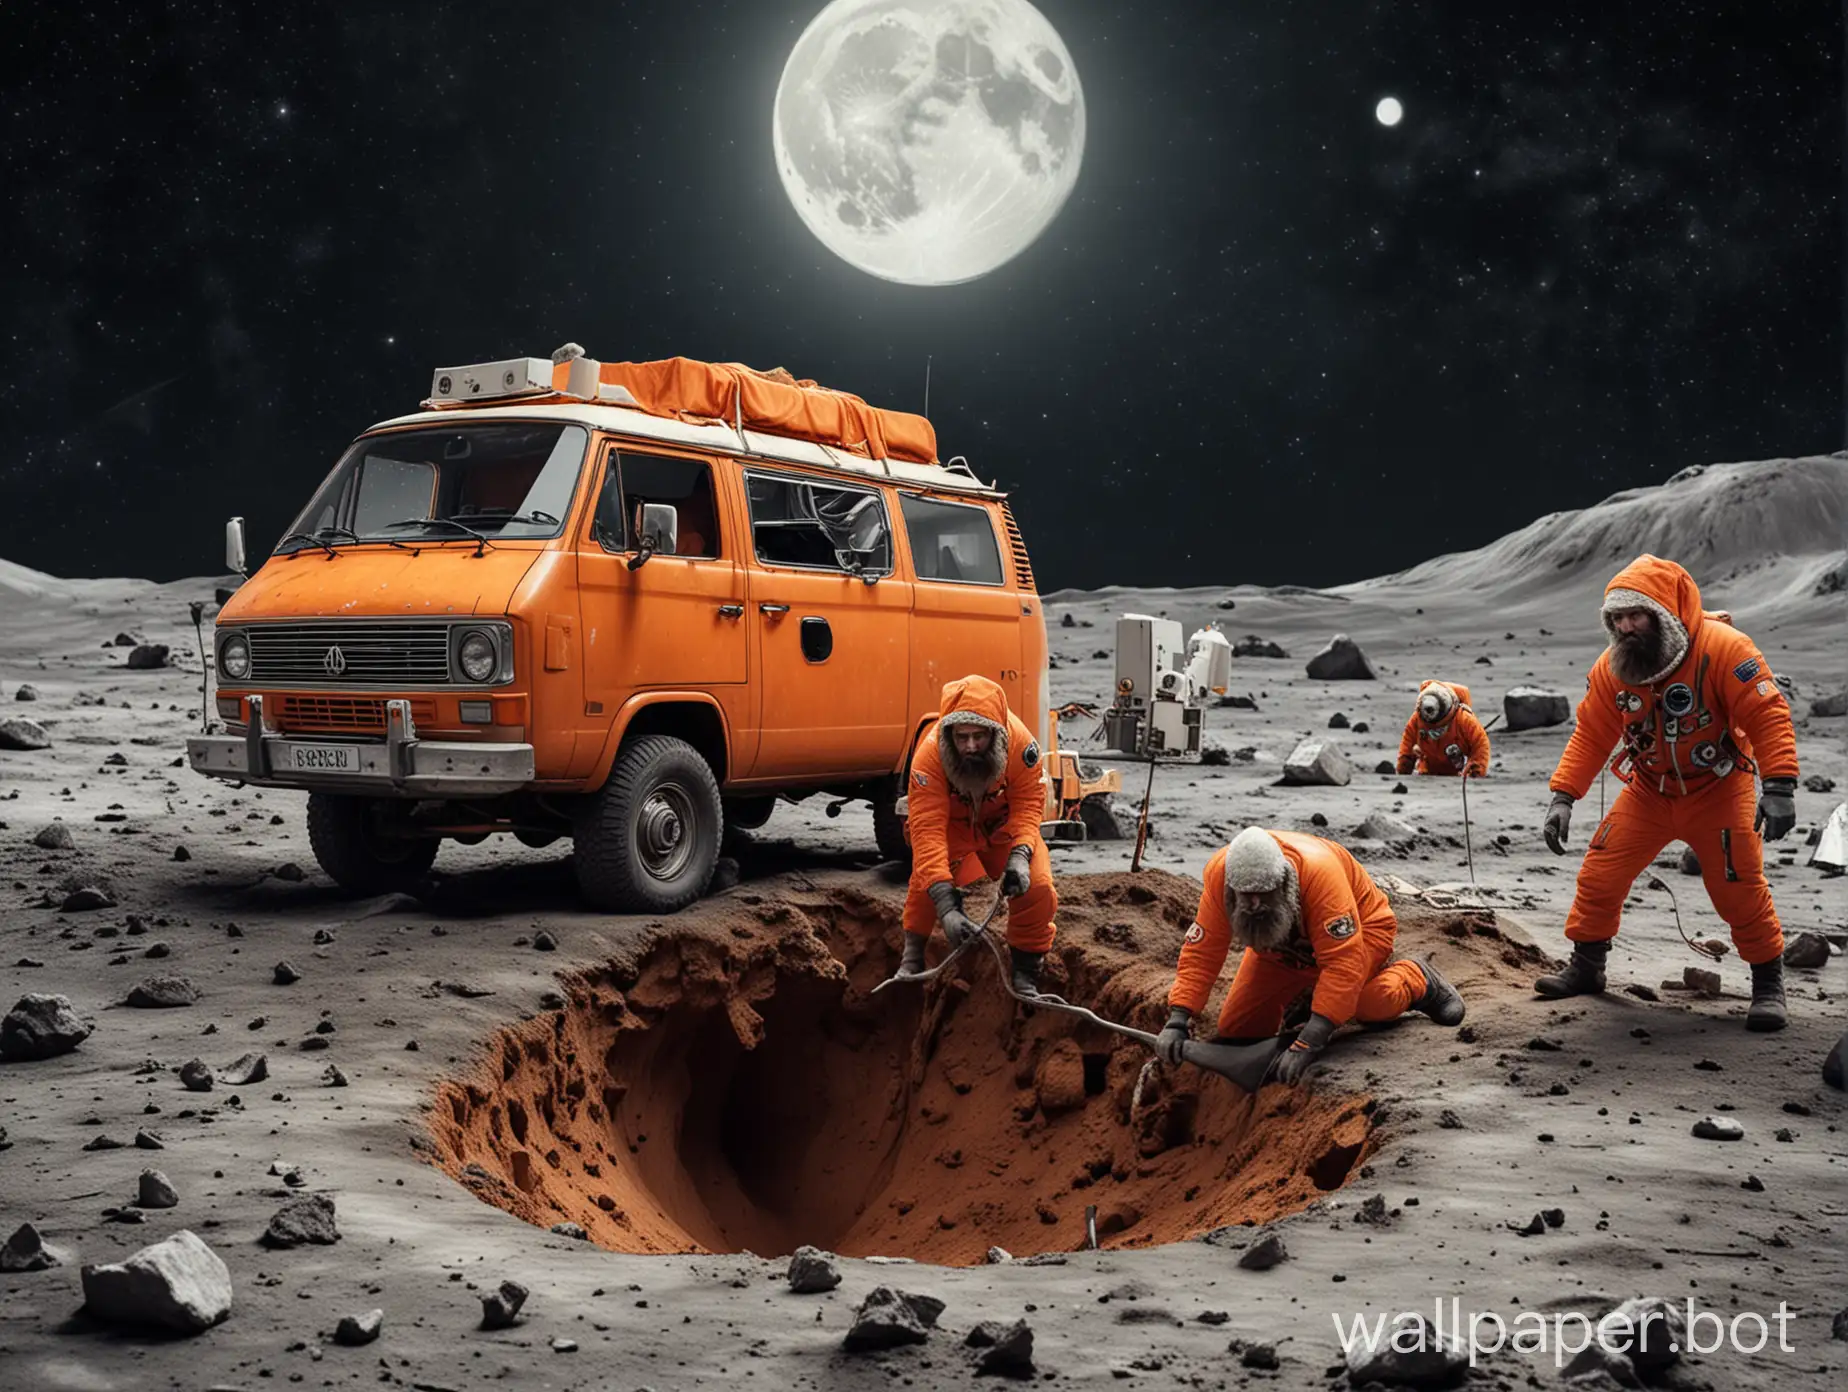 create an image of a van in space on the moon with two fat bearded men in orange clothing digging a hole